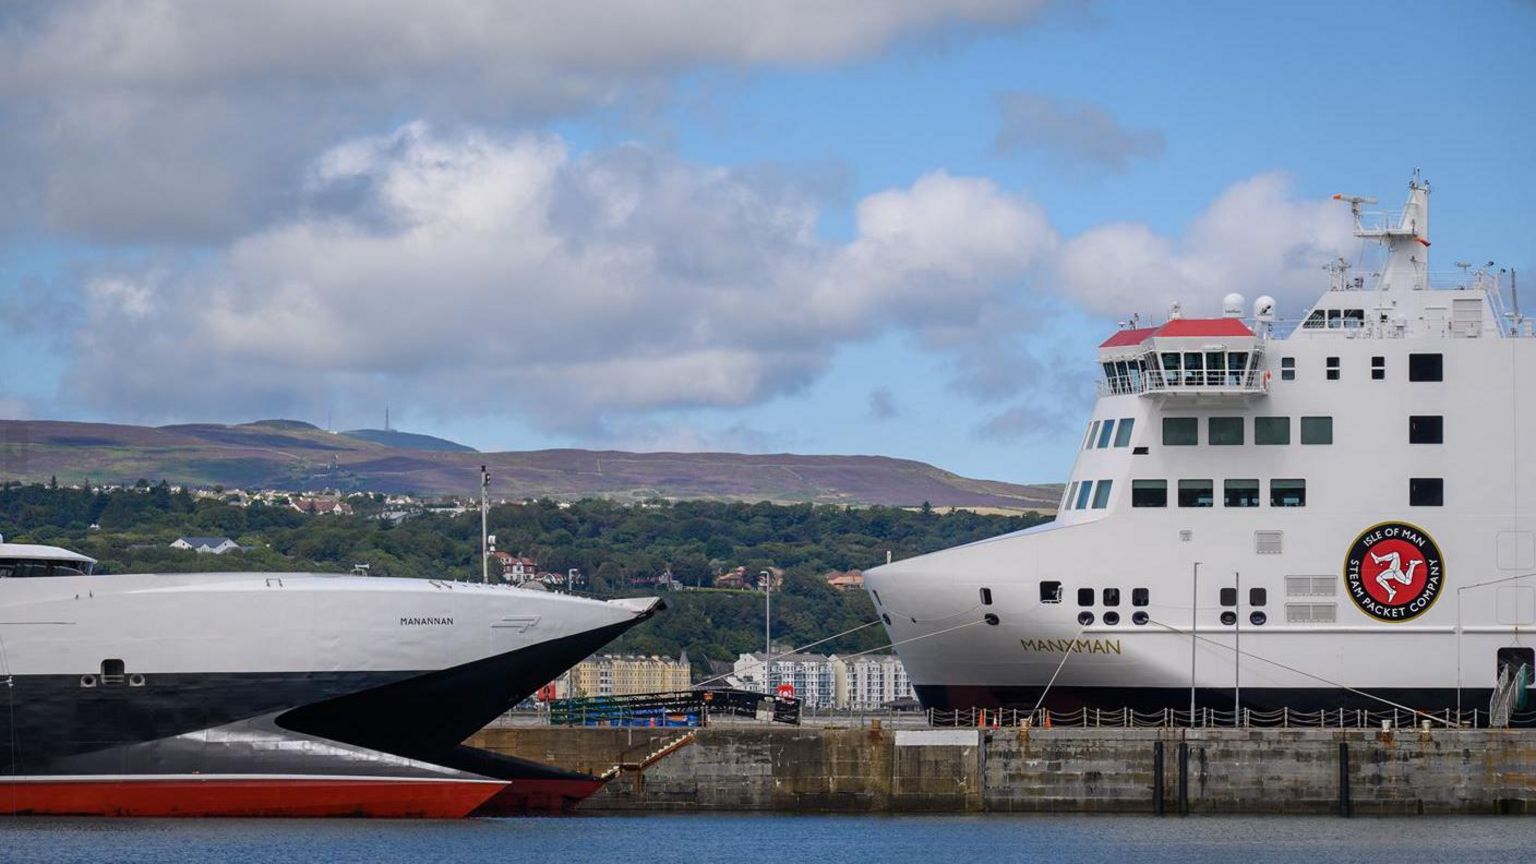 The Manannan and the Manxman in Douglas Harbour